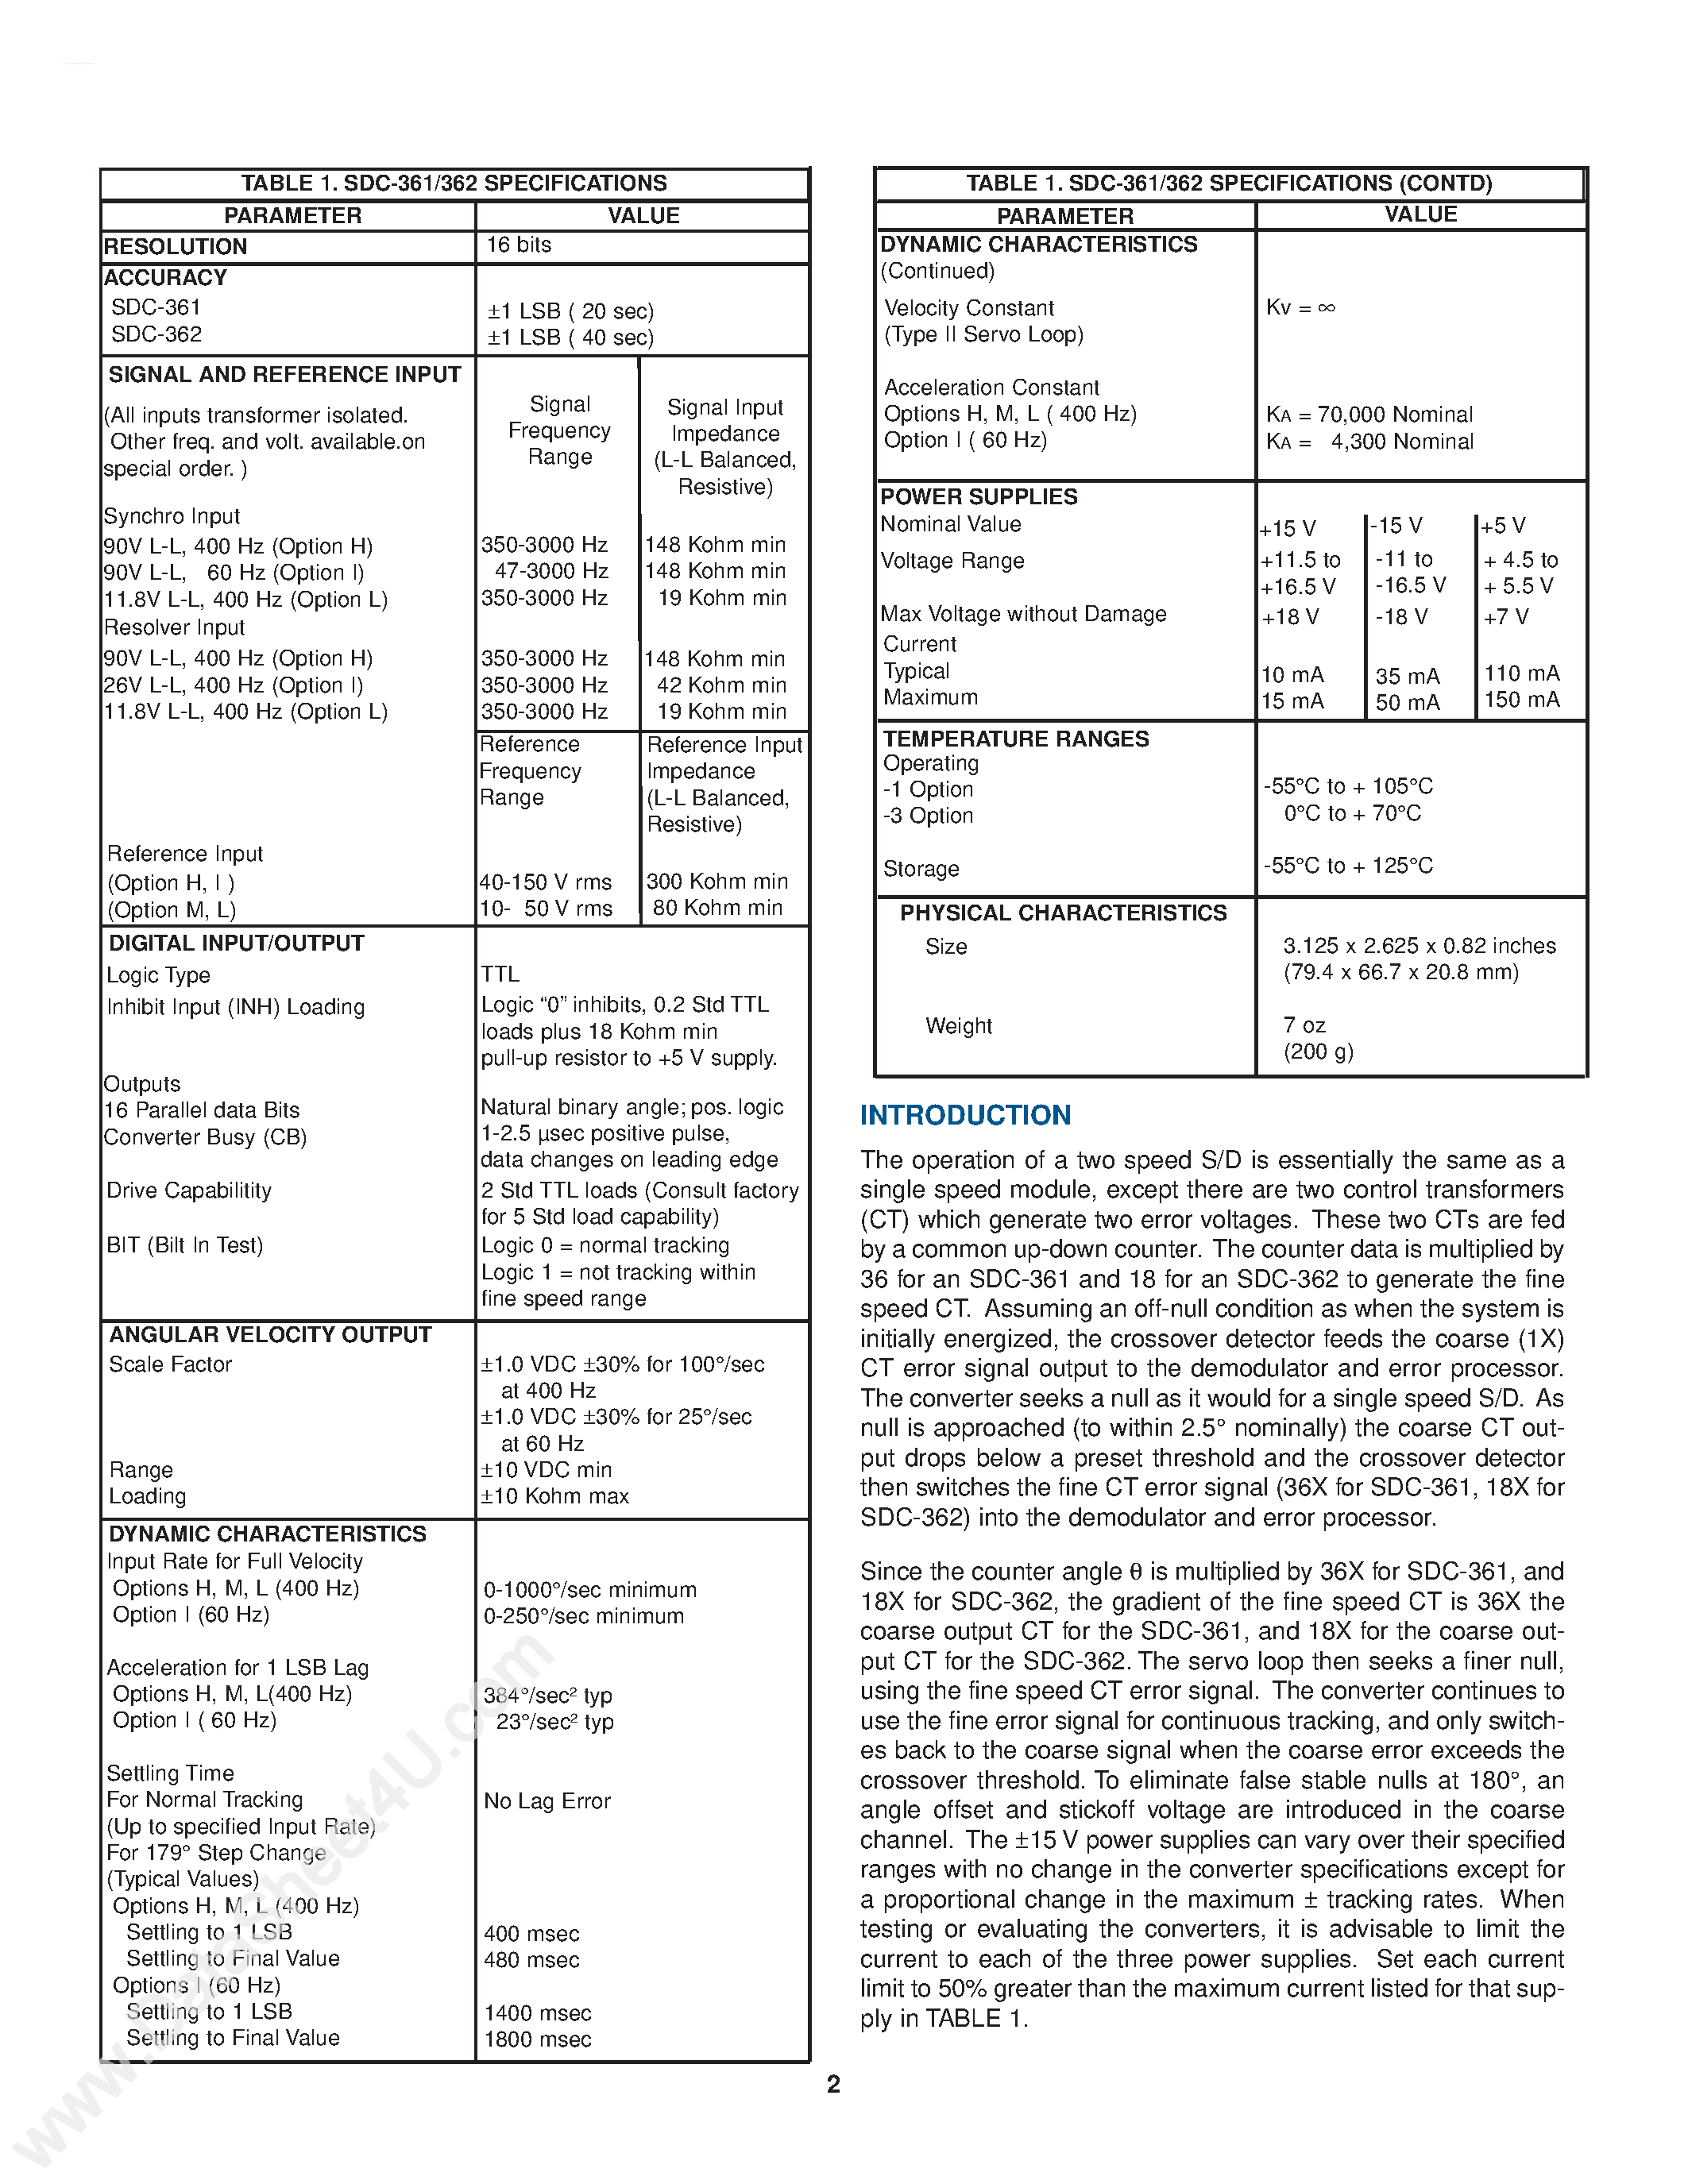 Datasheet SDC-361 - (SDC361 / SDC362) 16-Bit 2 Speed Synchro to Digital and Resolver to Digital Converter page 2